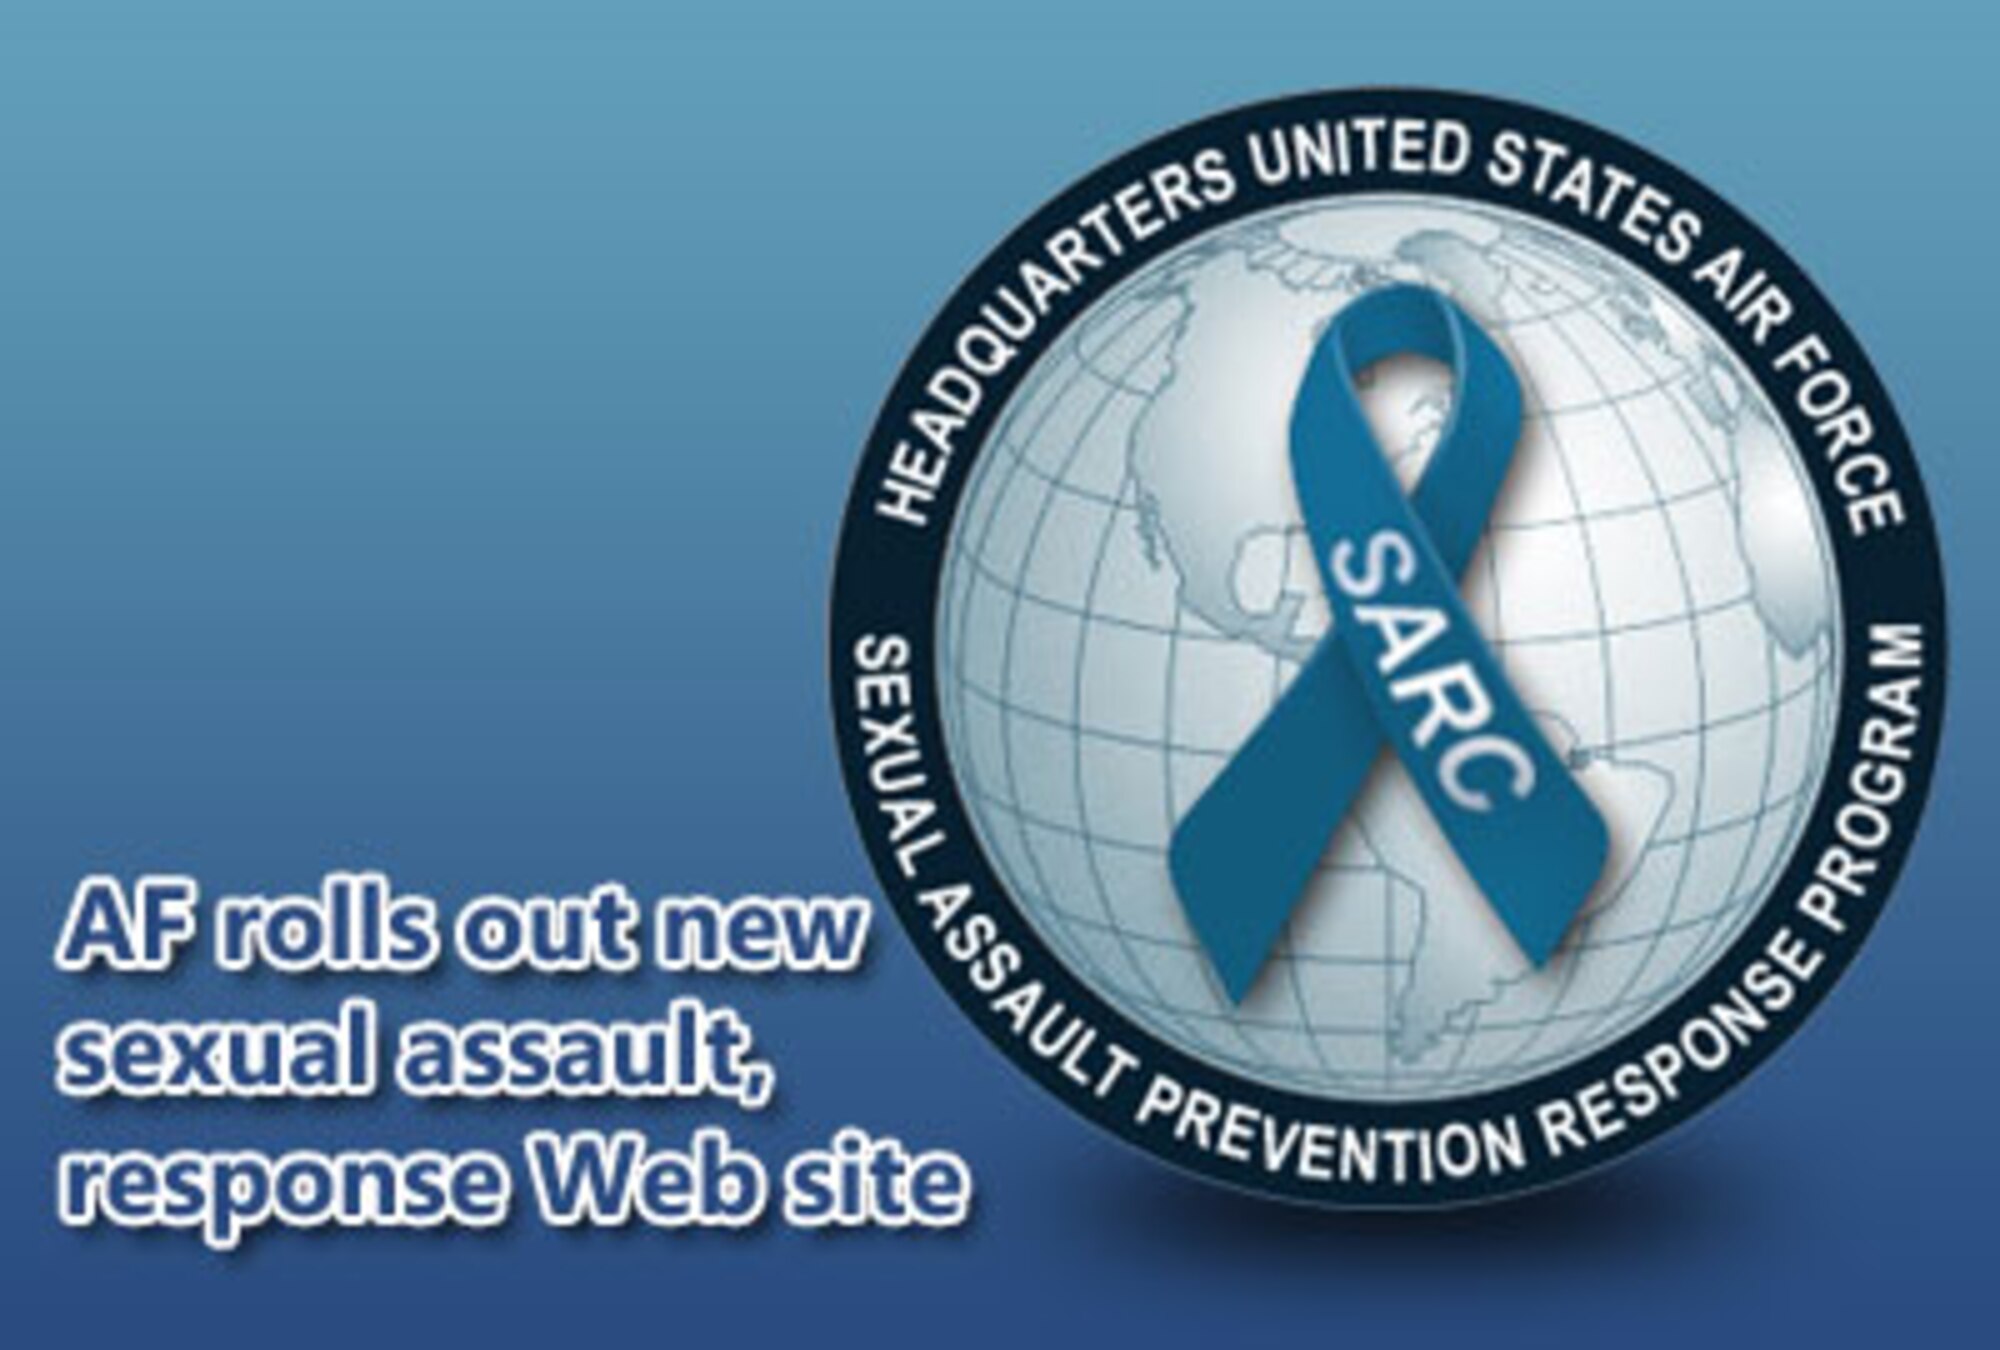 To reinforce the Air Force’s commitment to eliminating incidents of sexual assault, officials here have debuted a new Sexual Assault Prevention and Response Web site to raise awareness and provide prevention training, education, and victim advocacy.